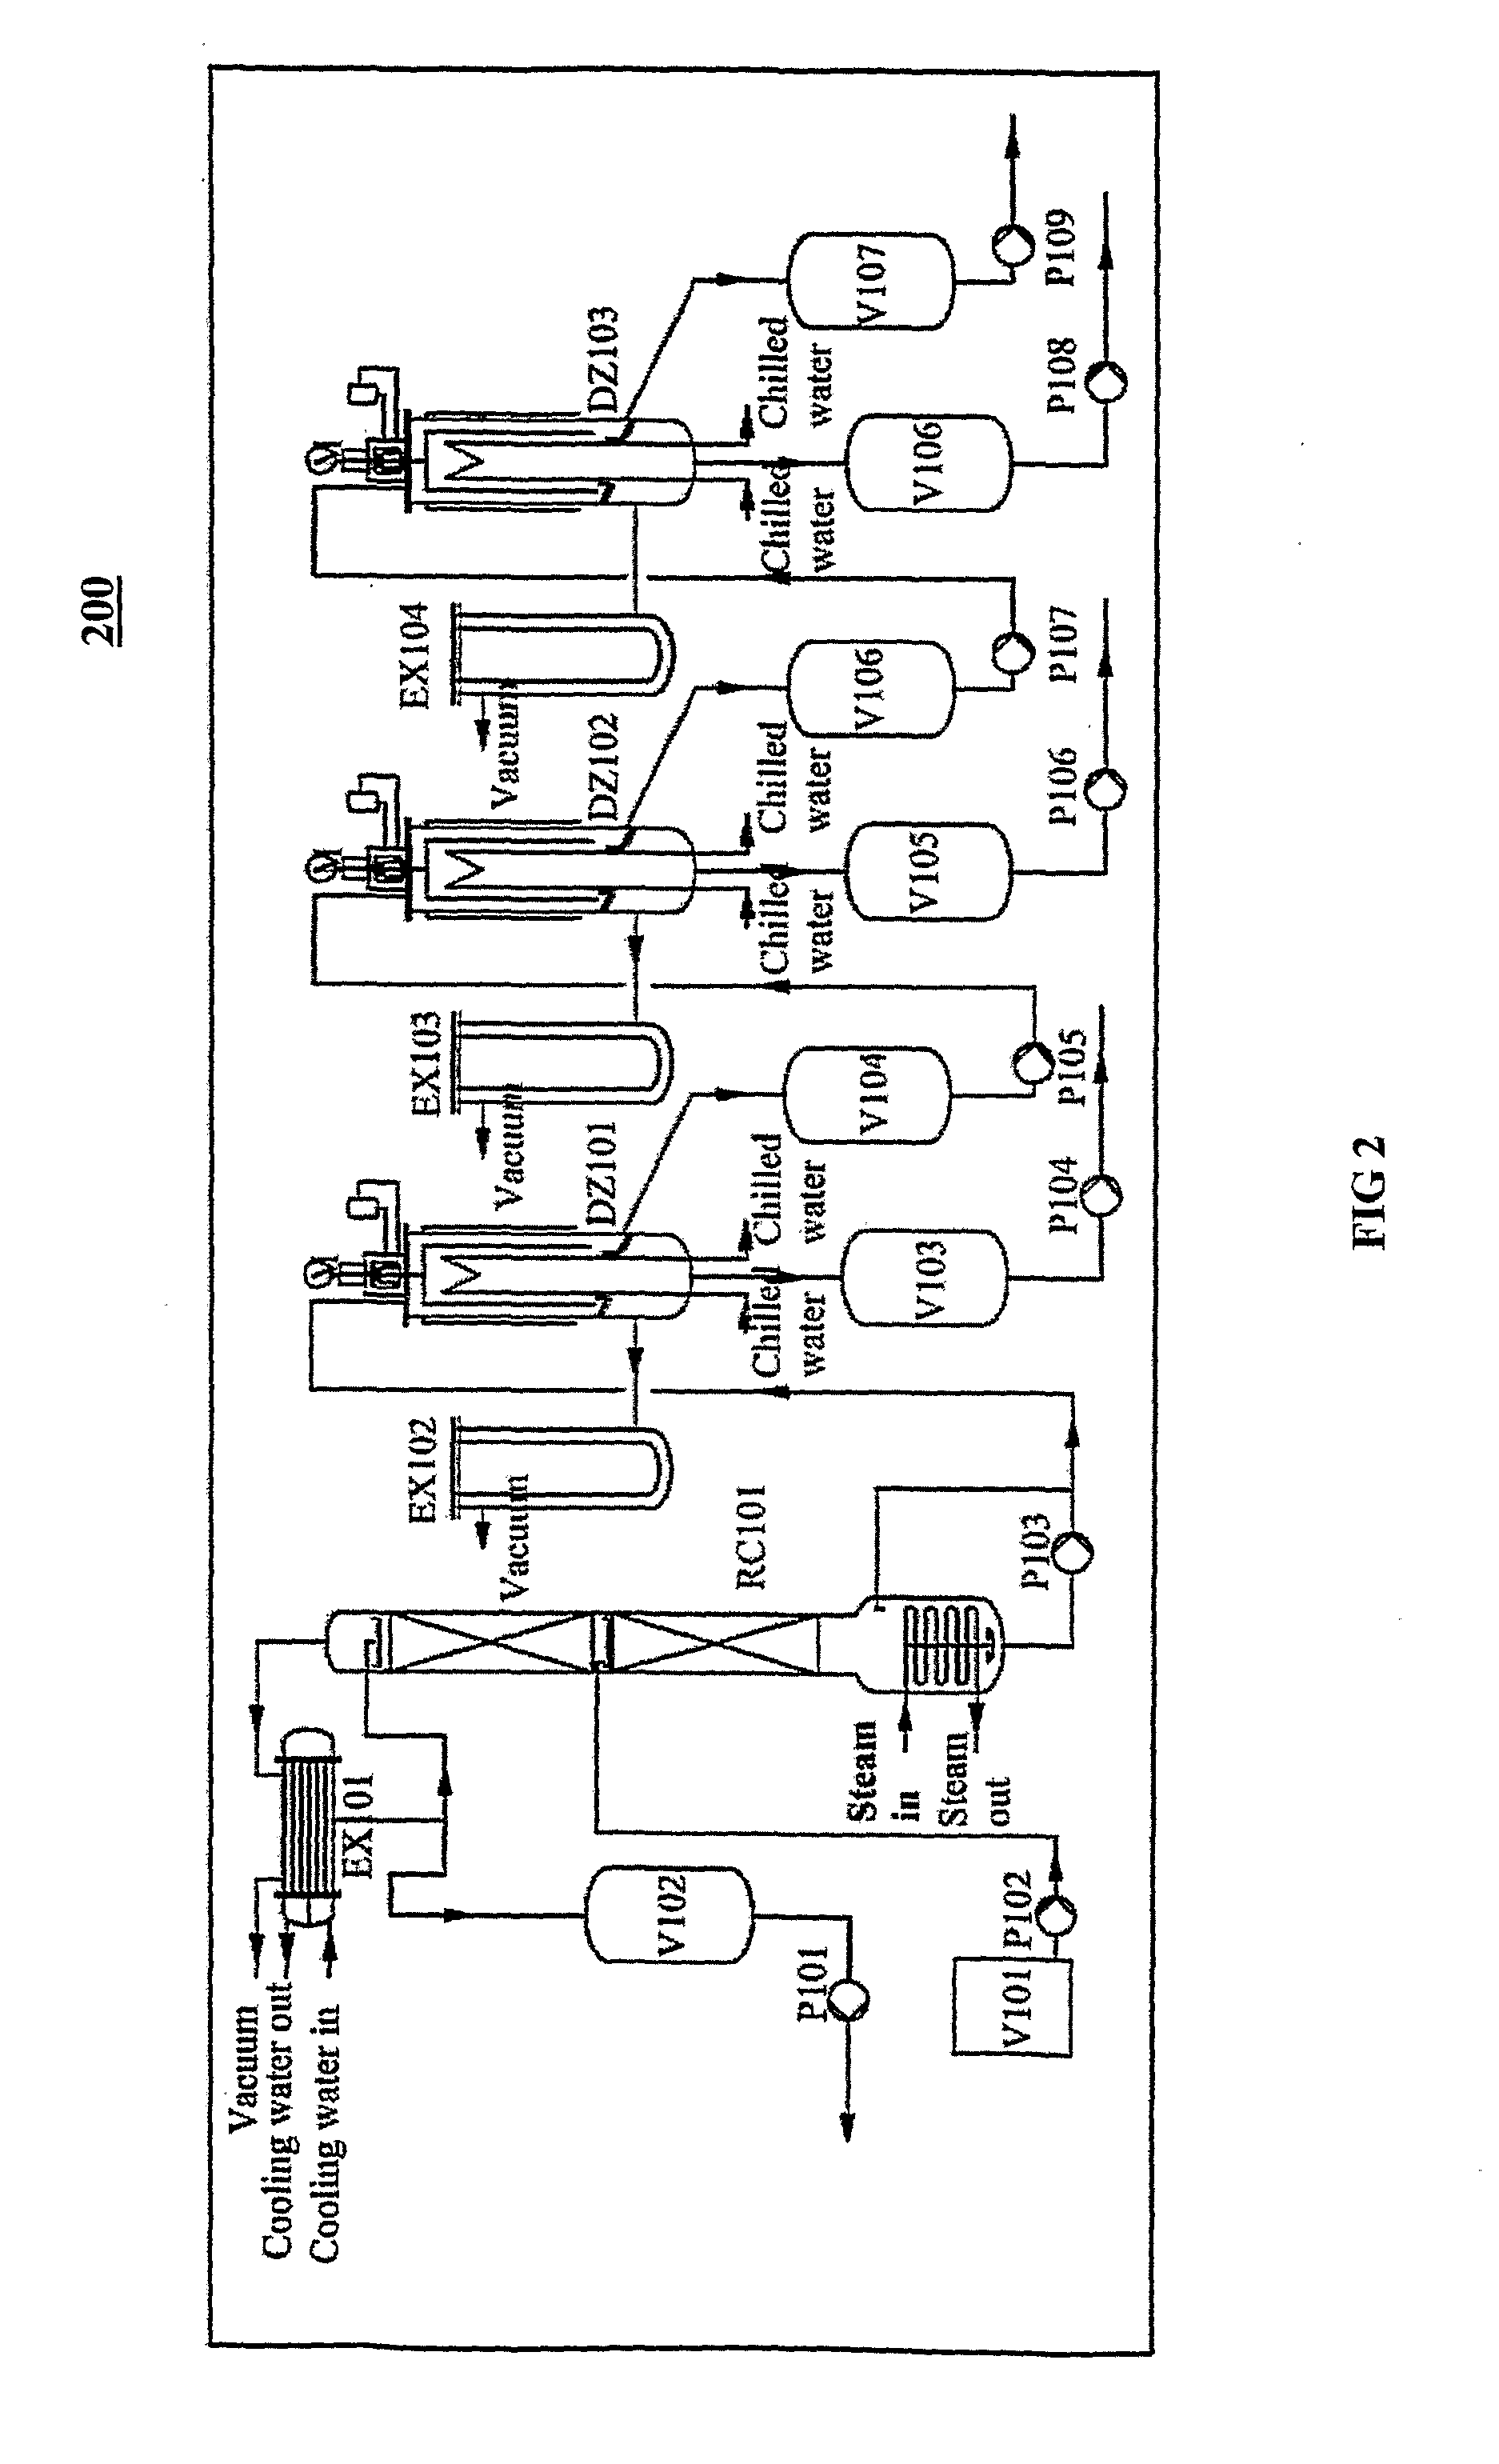 Process and system for recovering base oil from lubrication oil that contains contaminants therein